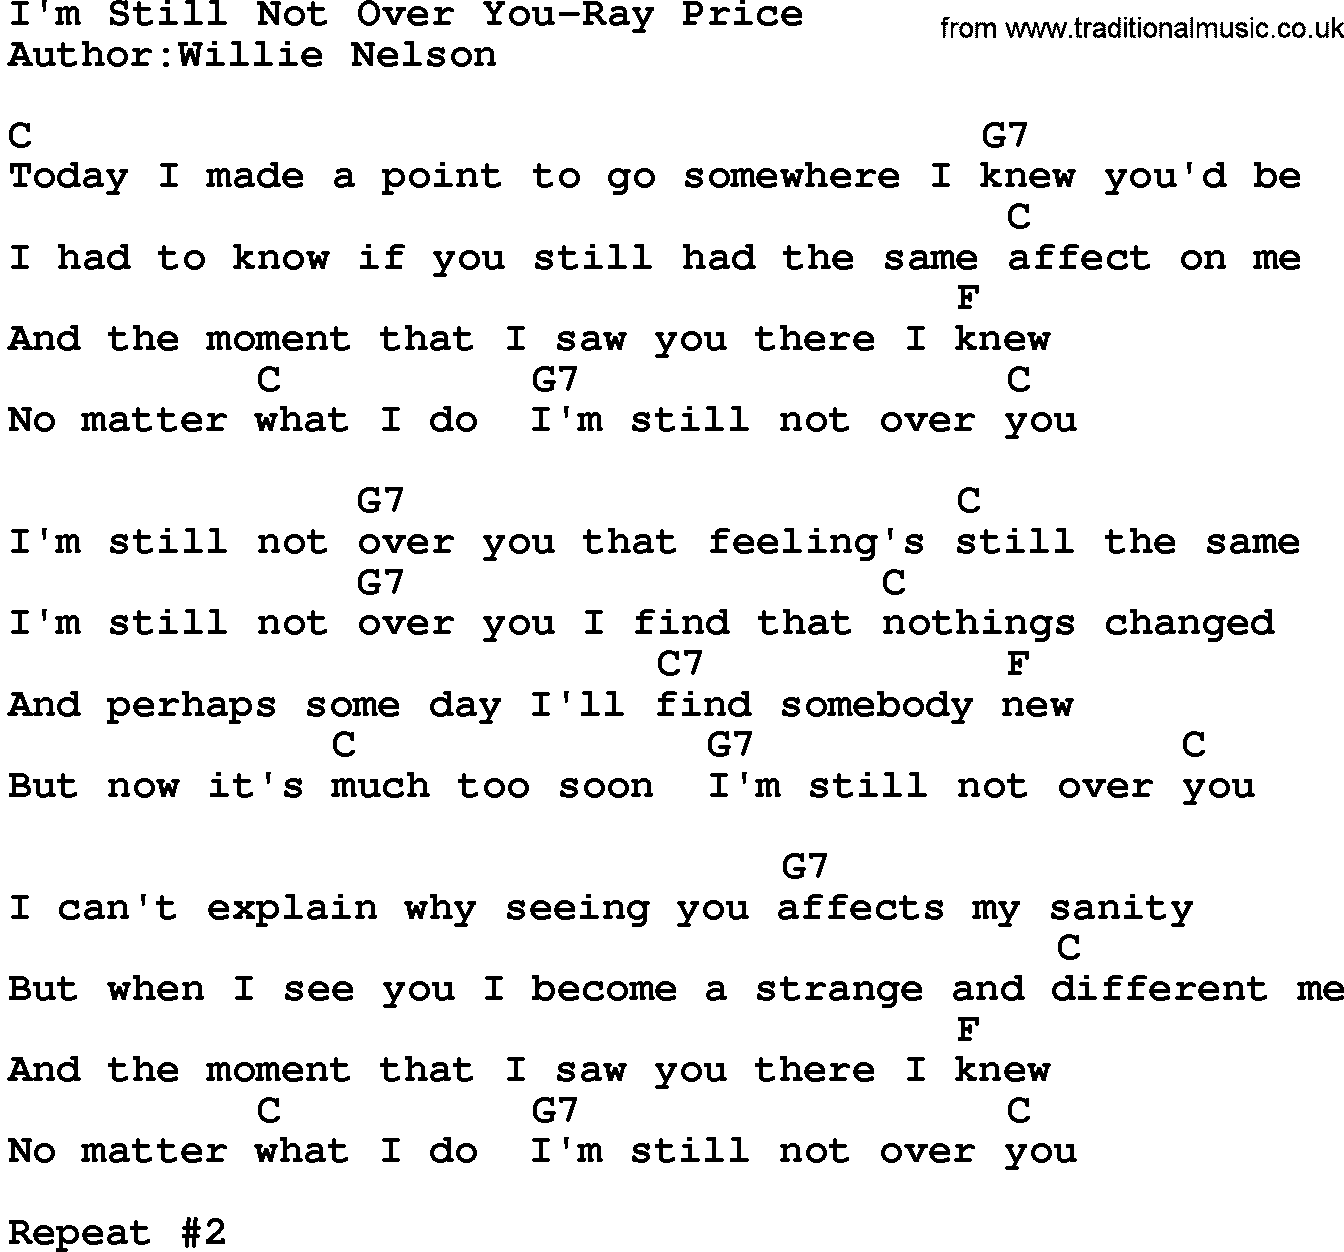 Country music song: I'm Still Not Over You-Ray Price lyrics and chords